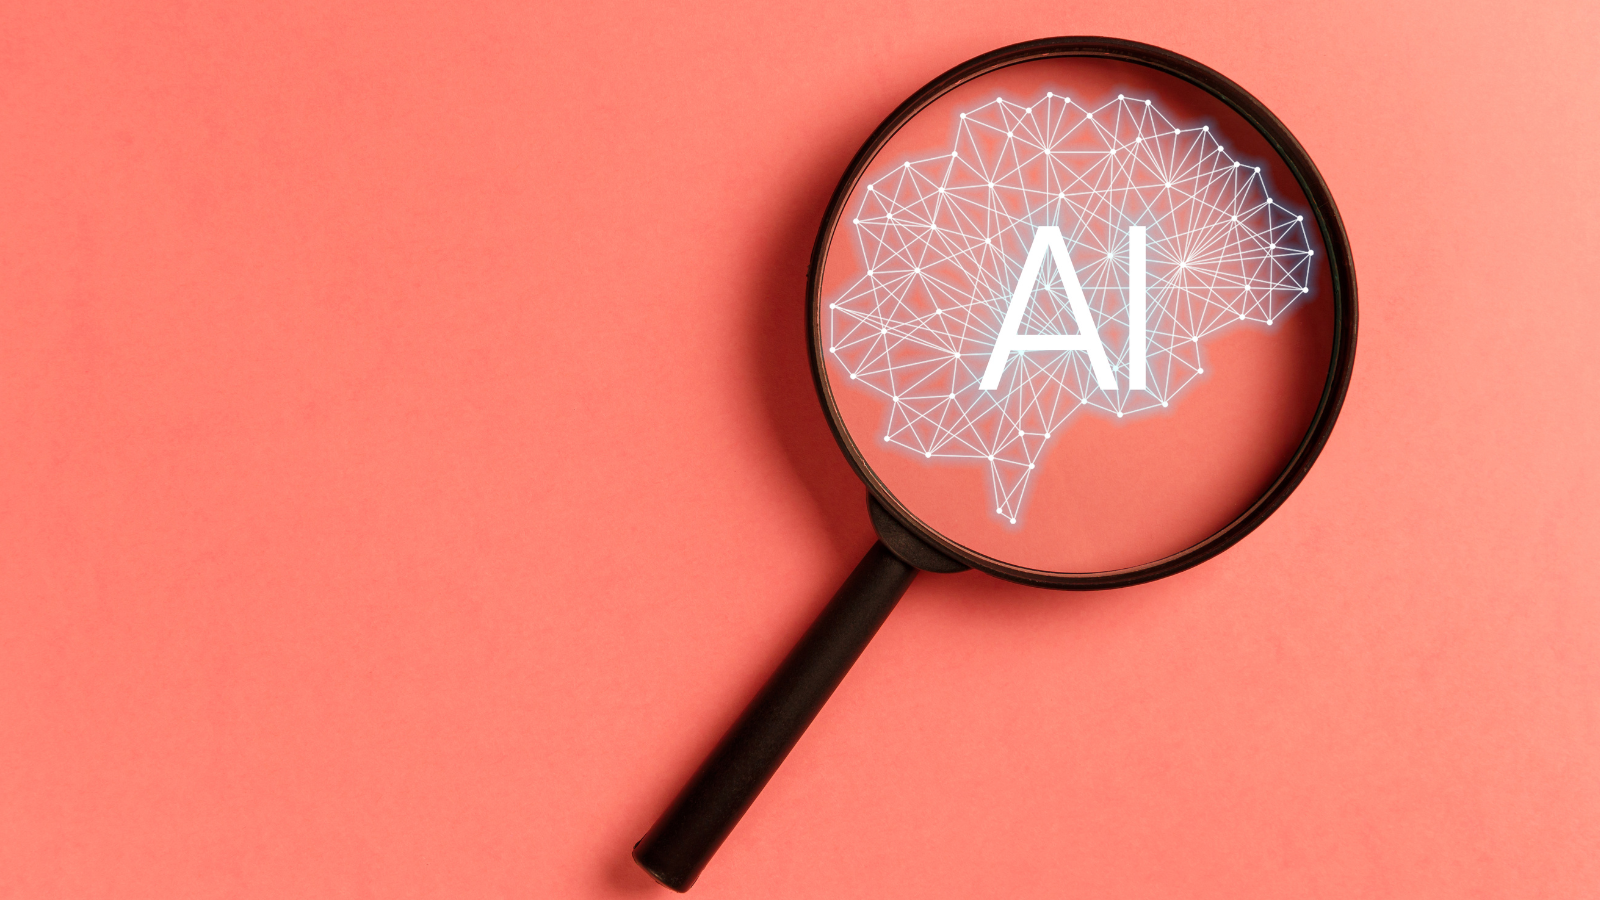 Automating Marketing Tasks with AI